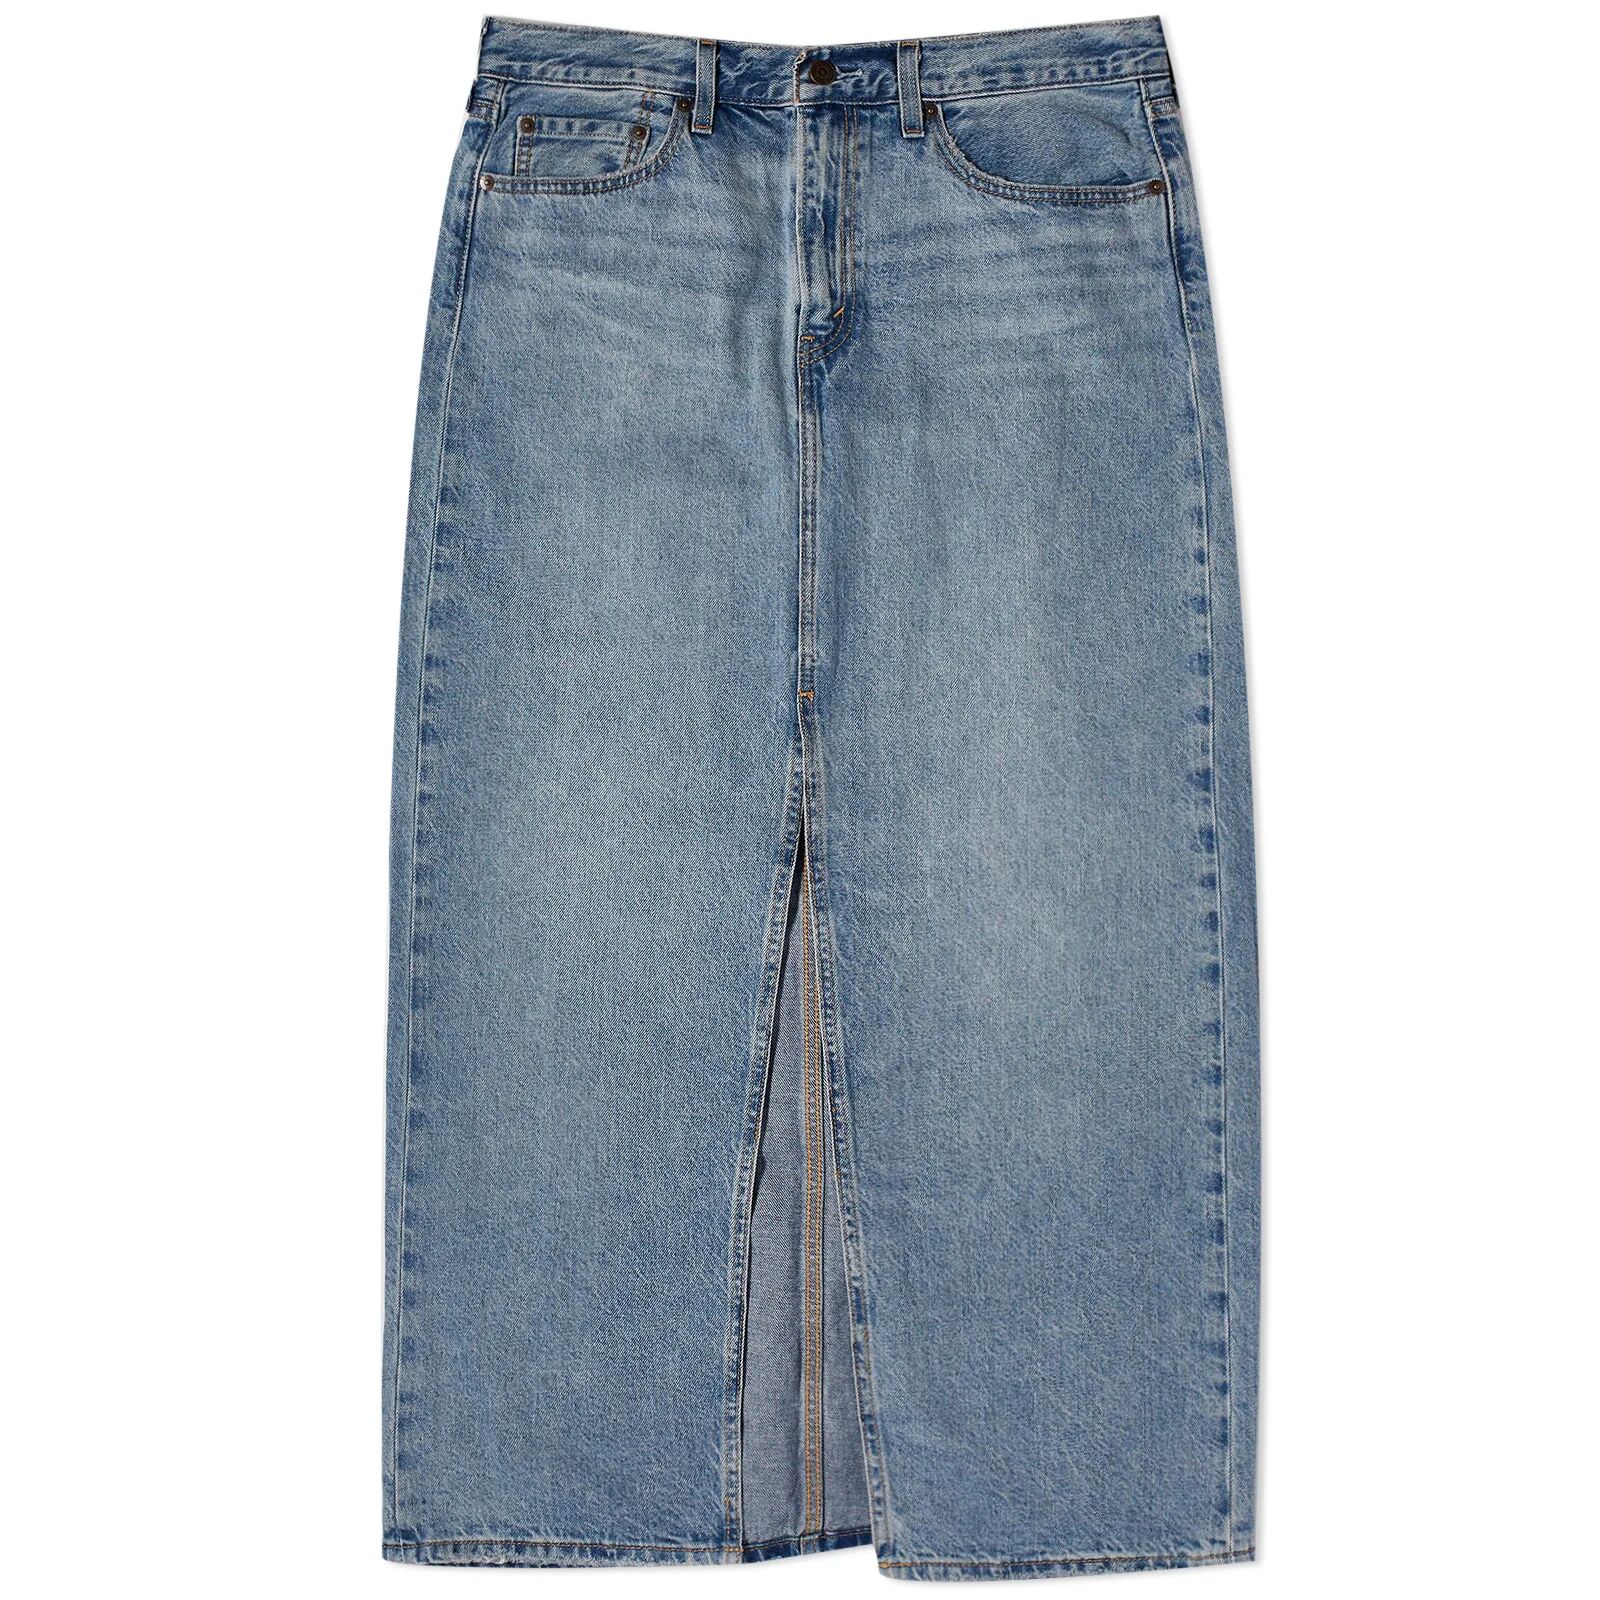 Levi’s Collections Women's Levis Vintage Clothing Ankle Column Skirt in Please Hold, Size 27"